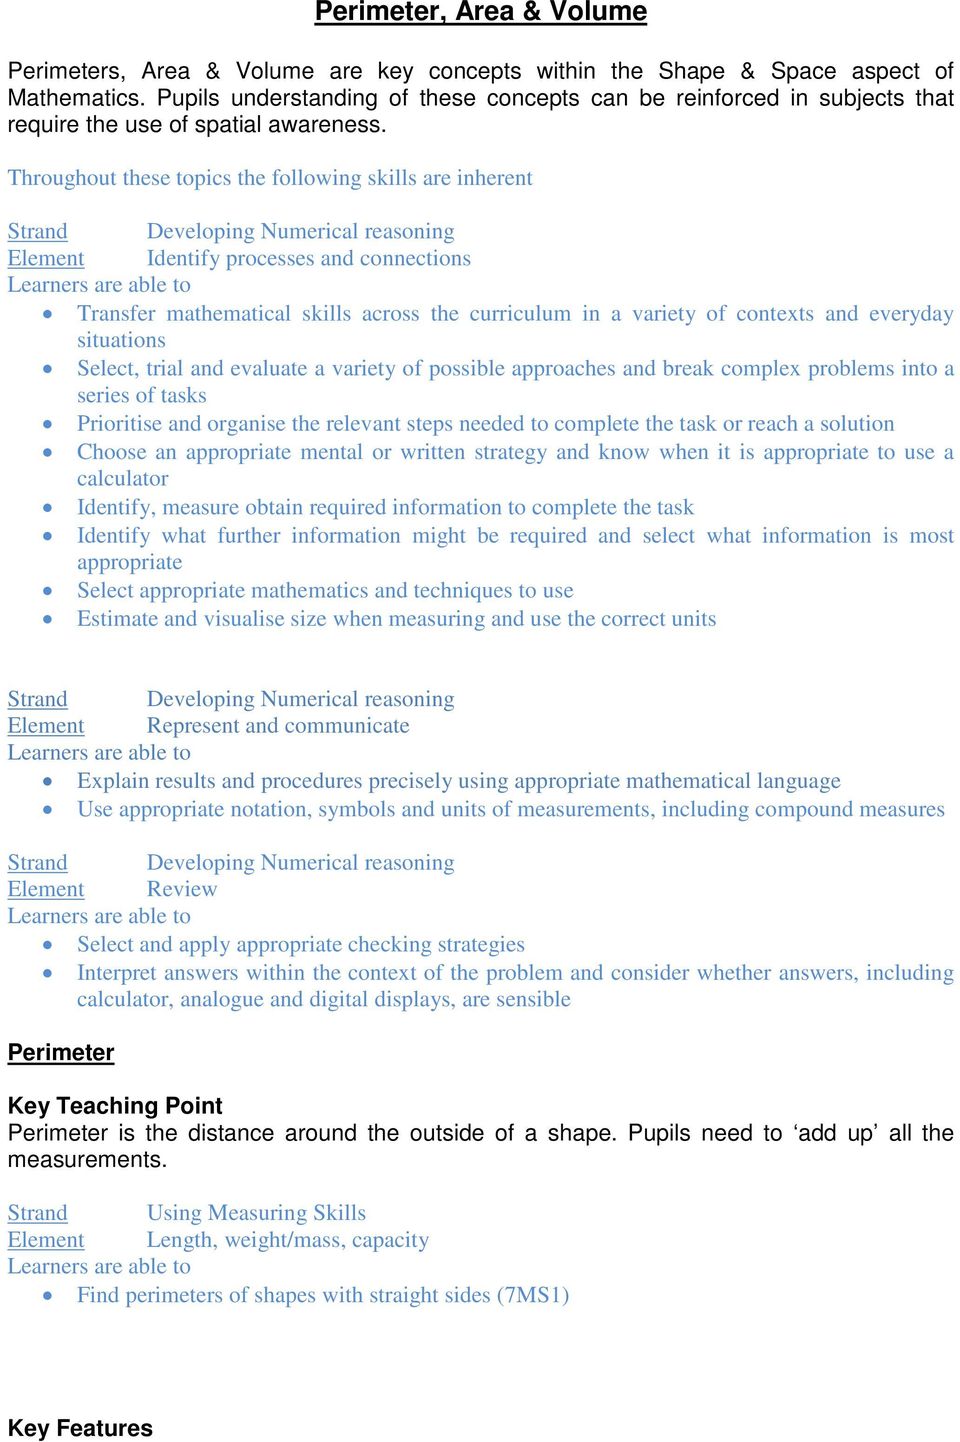 Throughout these topics the following skills are inherent Strand Developing Numerical reasoning Element Identify processes and connections Transfer mathematical skills across the curriculum in a